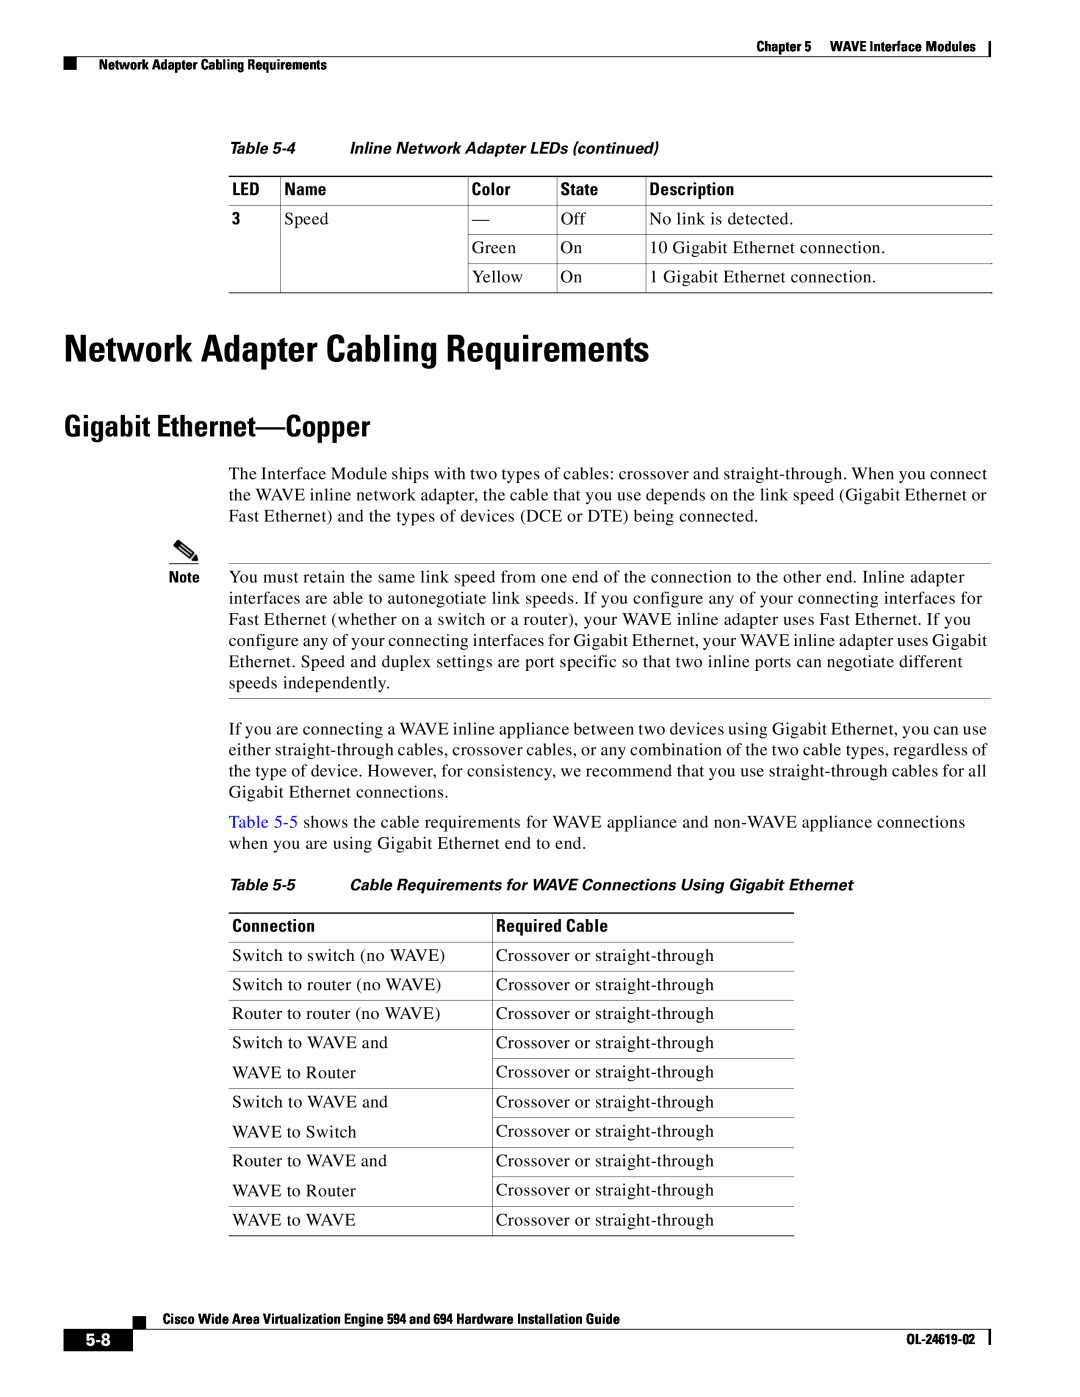 Cisco Systems WAVE594K9 Network Adapter Cabling Requirements, Gigabit Ethernet-Copper, Connection, Required Cable, Name 